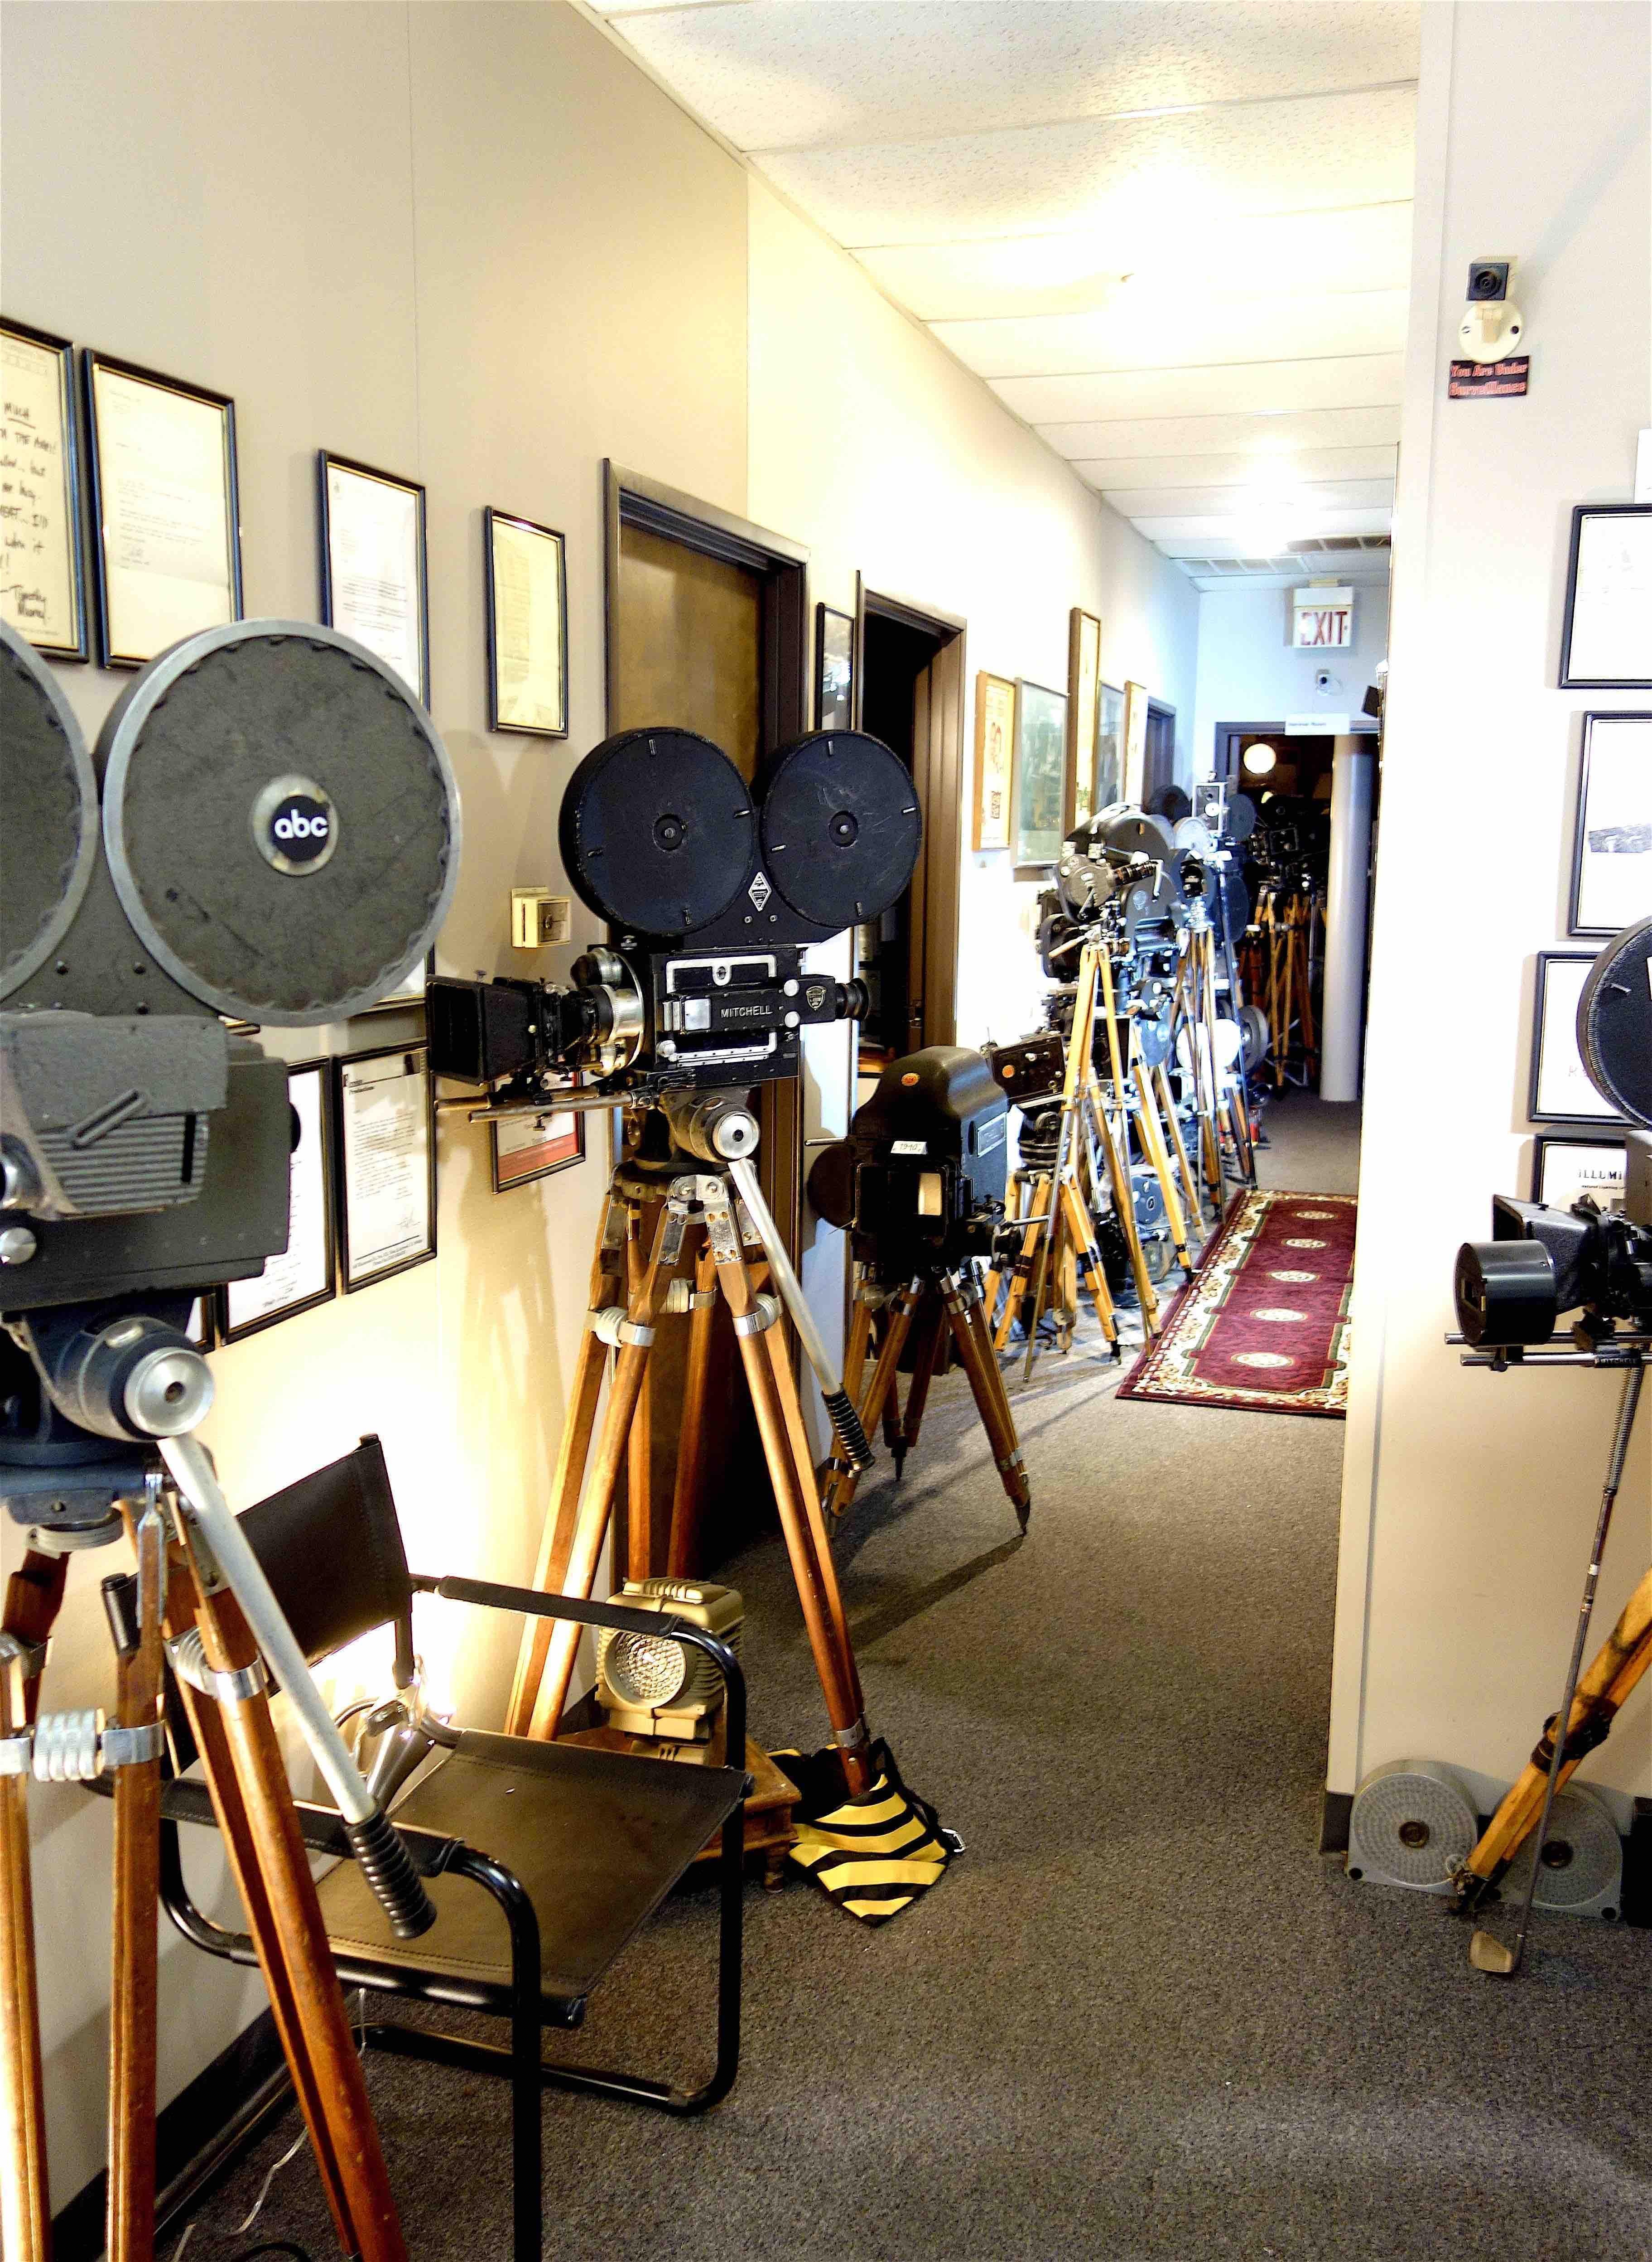 For your consideration, an array of three iconic vintage Hollywood cinema spotlight fixtures all in the same original Mole Richardson factory color, sitting on factory correct vintage stands.

All have original patina from working in Motion